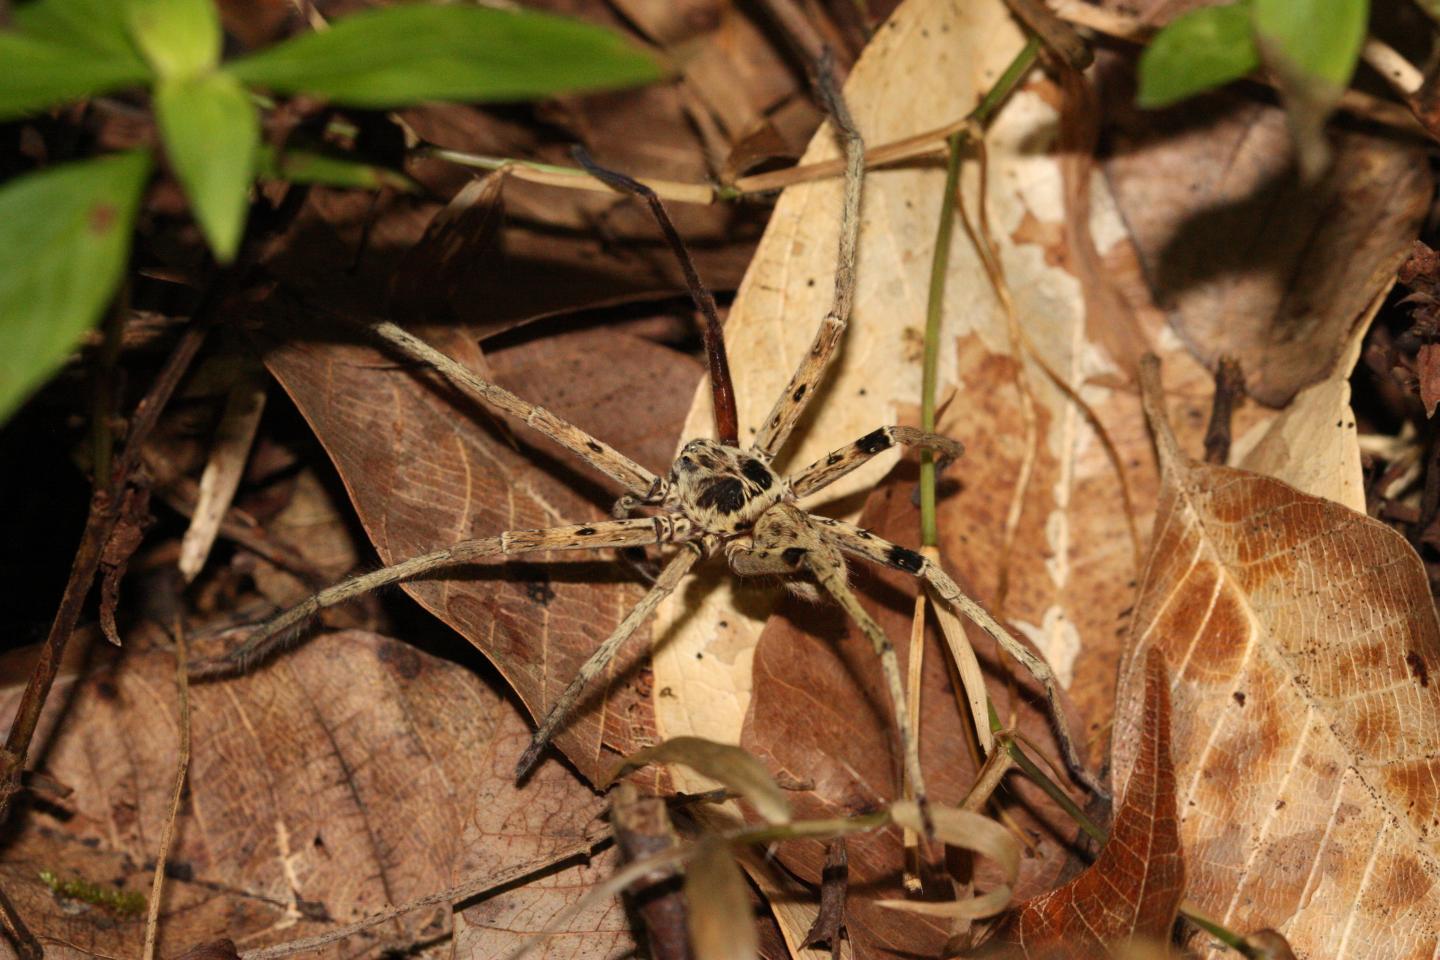 A Malaysian Spider